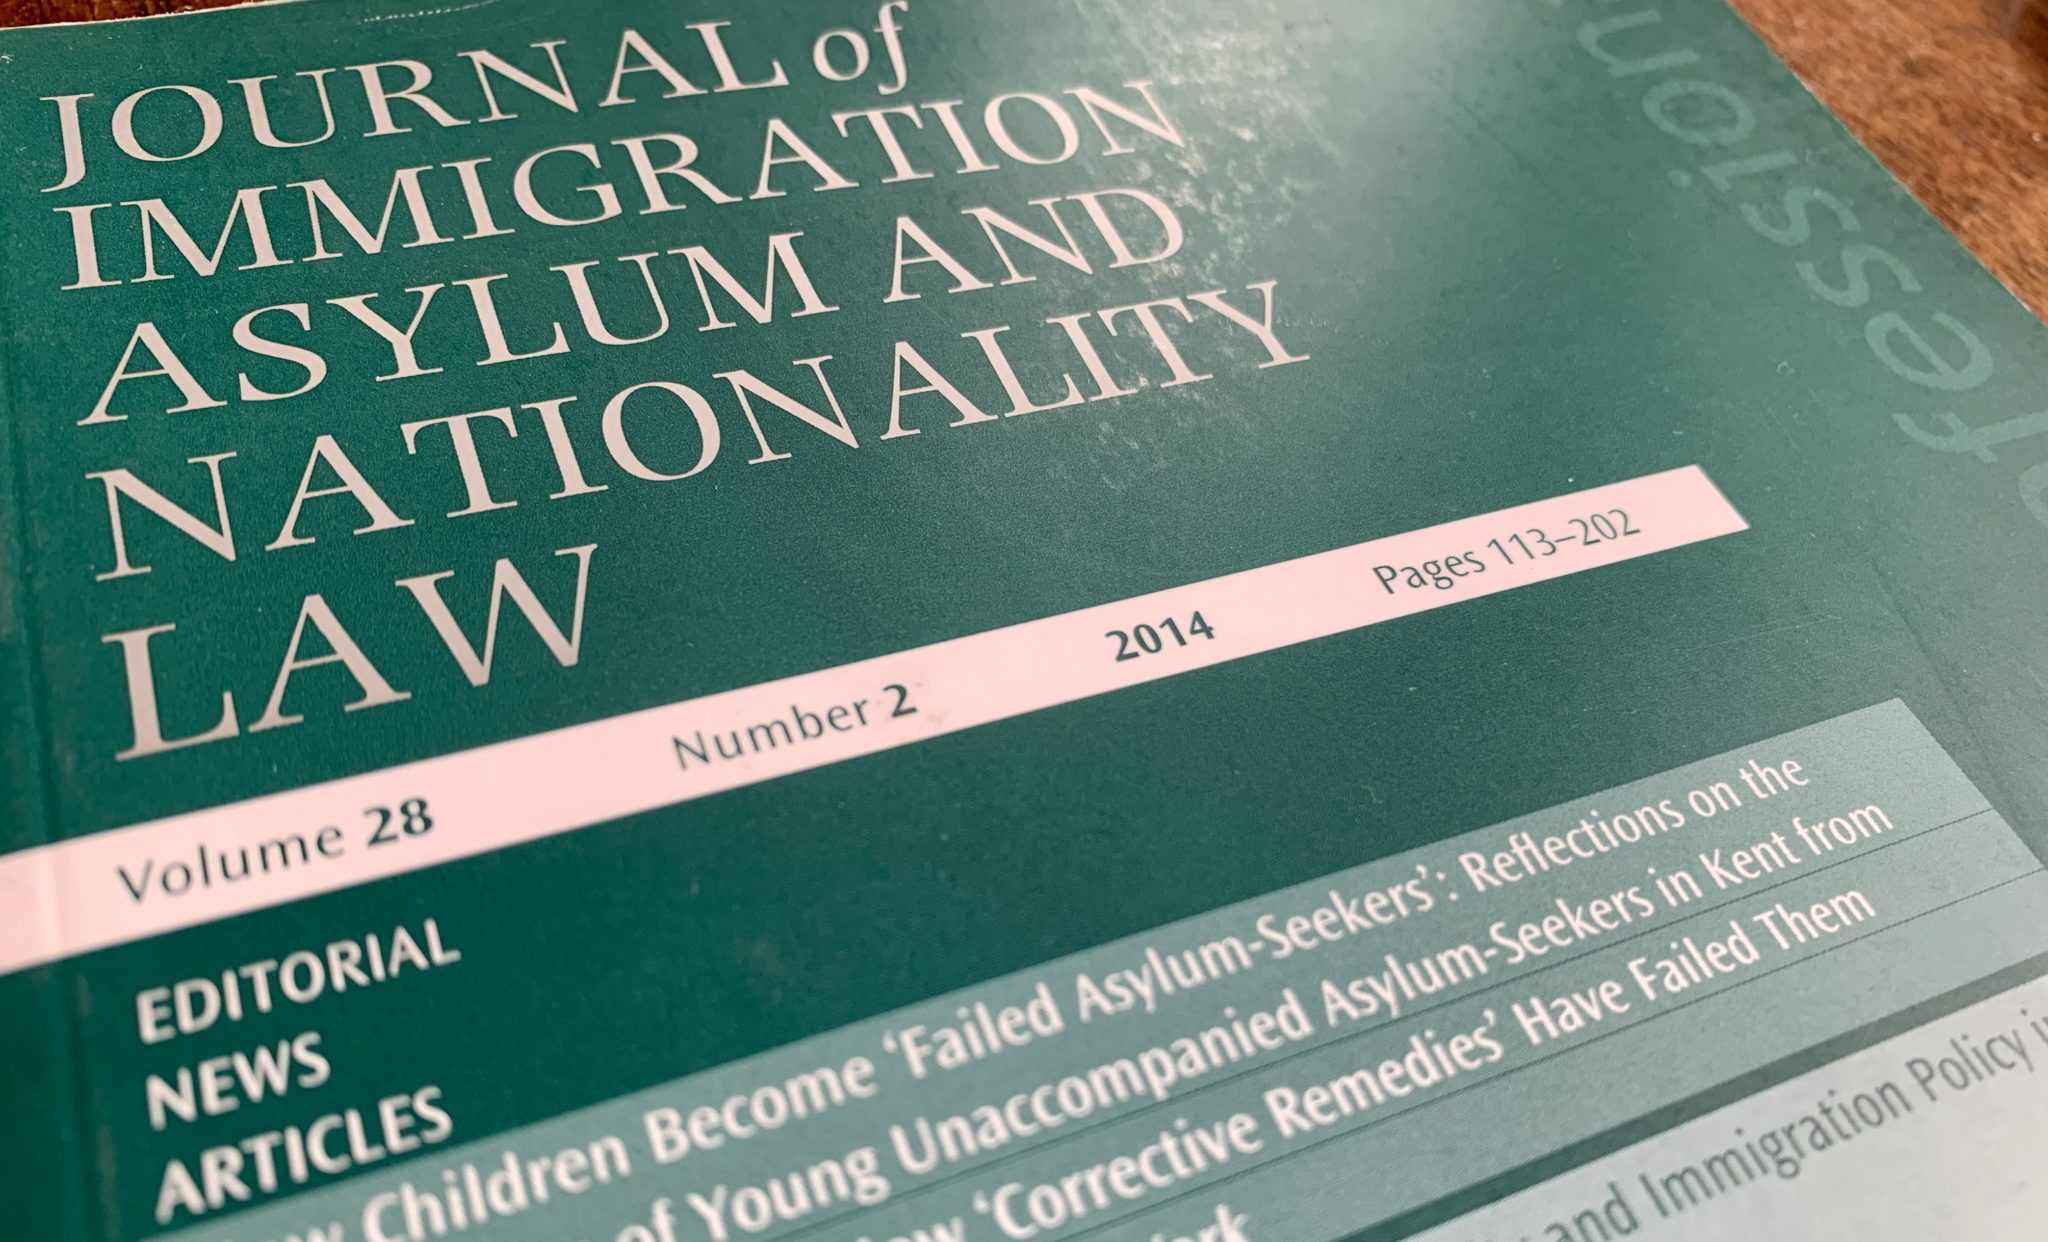 Deputy editor sought for Journal of Immigration, Asylum and Nationality Law